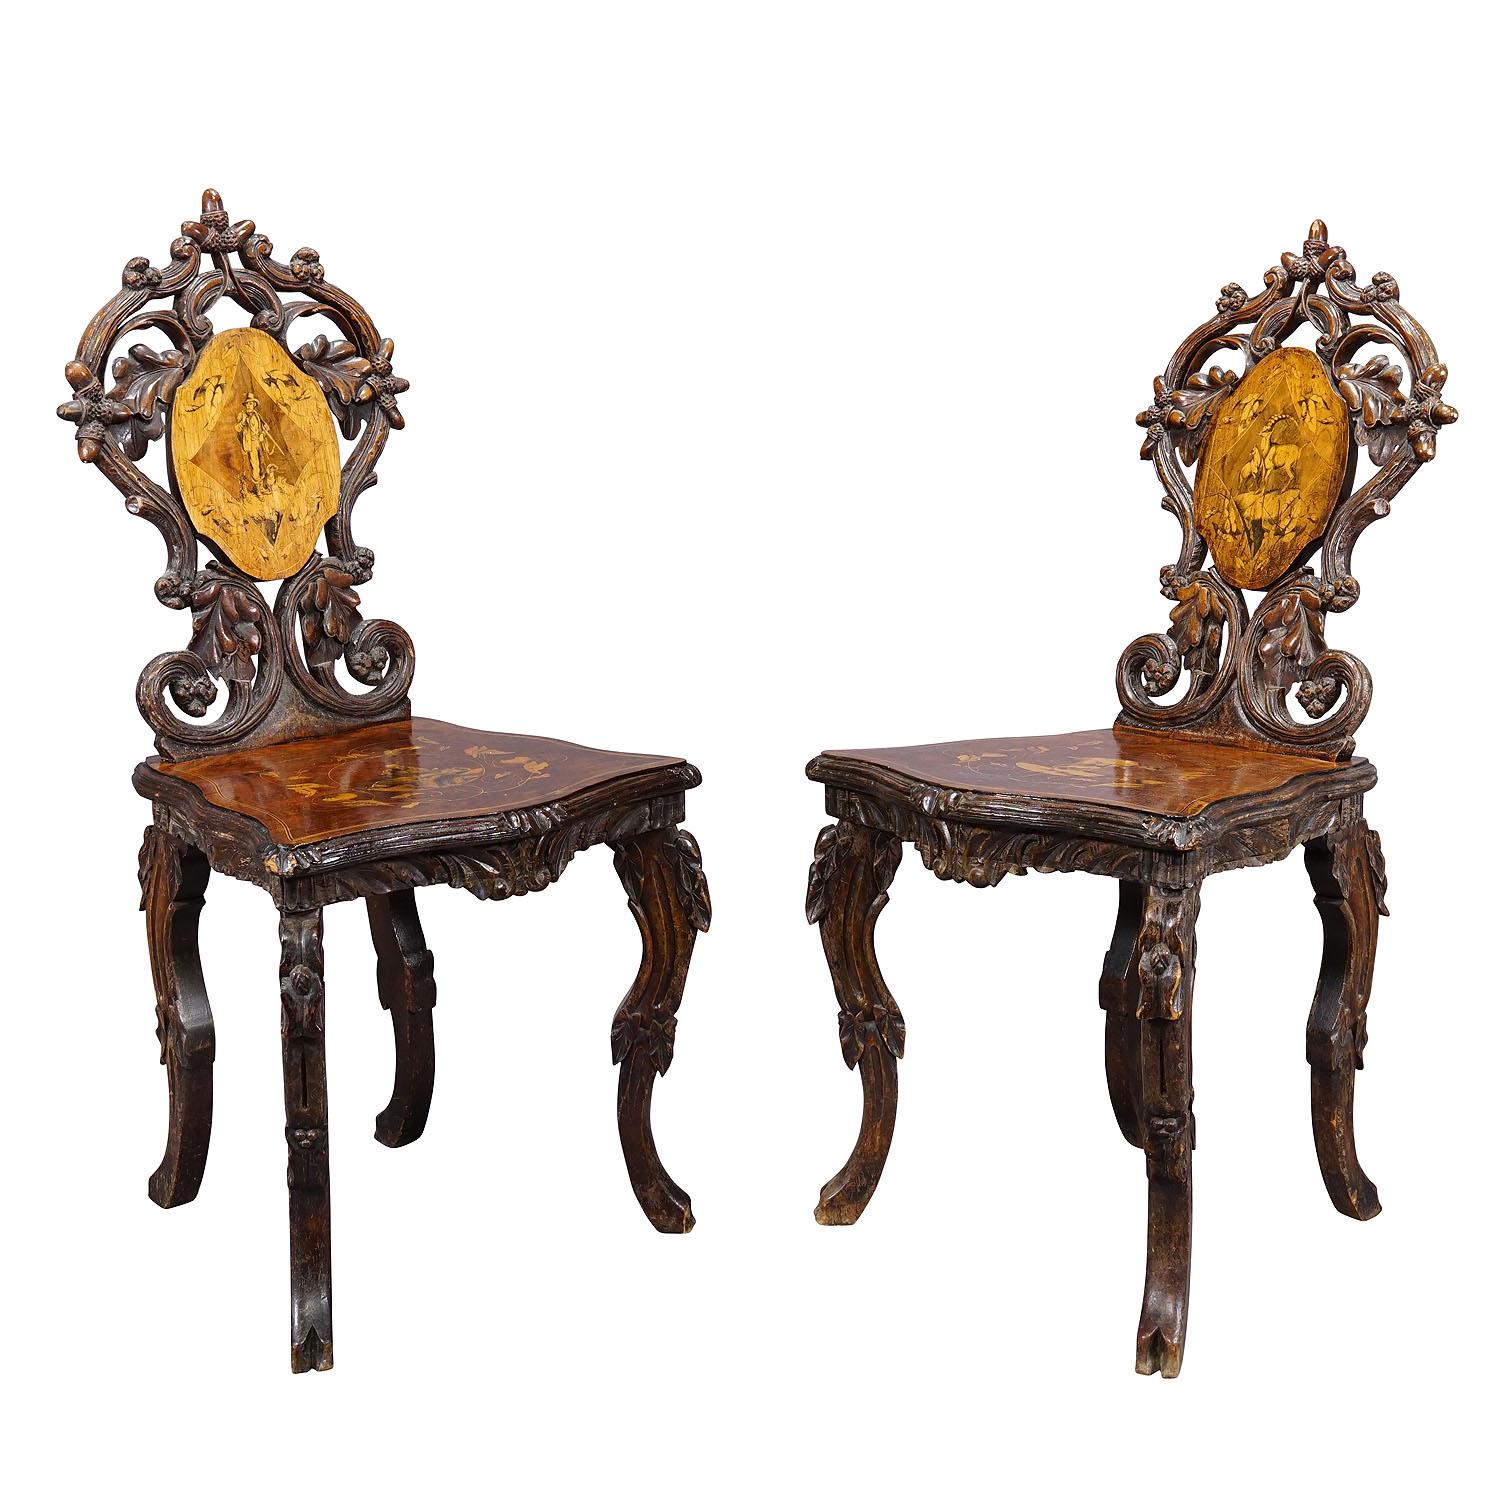 Pair Nutwood Edelweis Marquetry Chairs Swiss Brienz 1900

A pair wonderful inlayed nutwood chairs decorated with inlayed and painted sceneries depicting chamois, goat, hare, hunter, stag and edelweis flowers. Surrounded by ebony and lindenwood